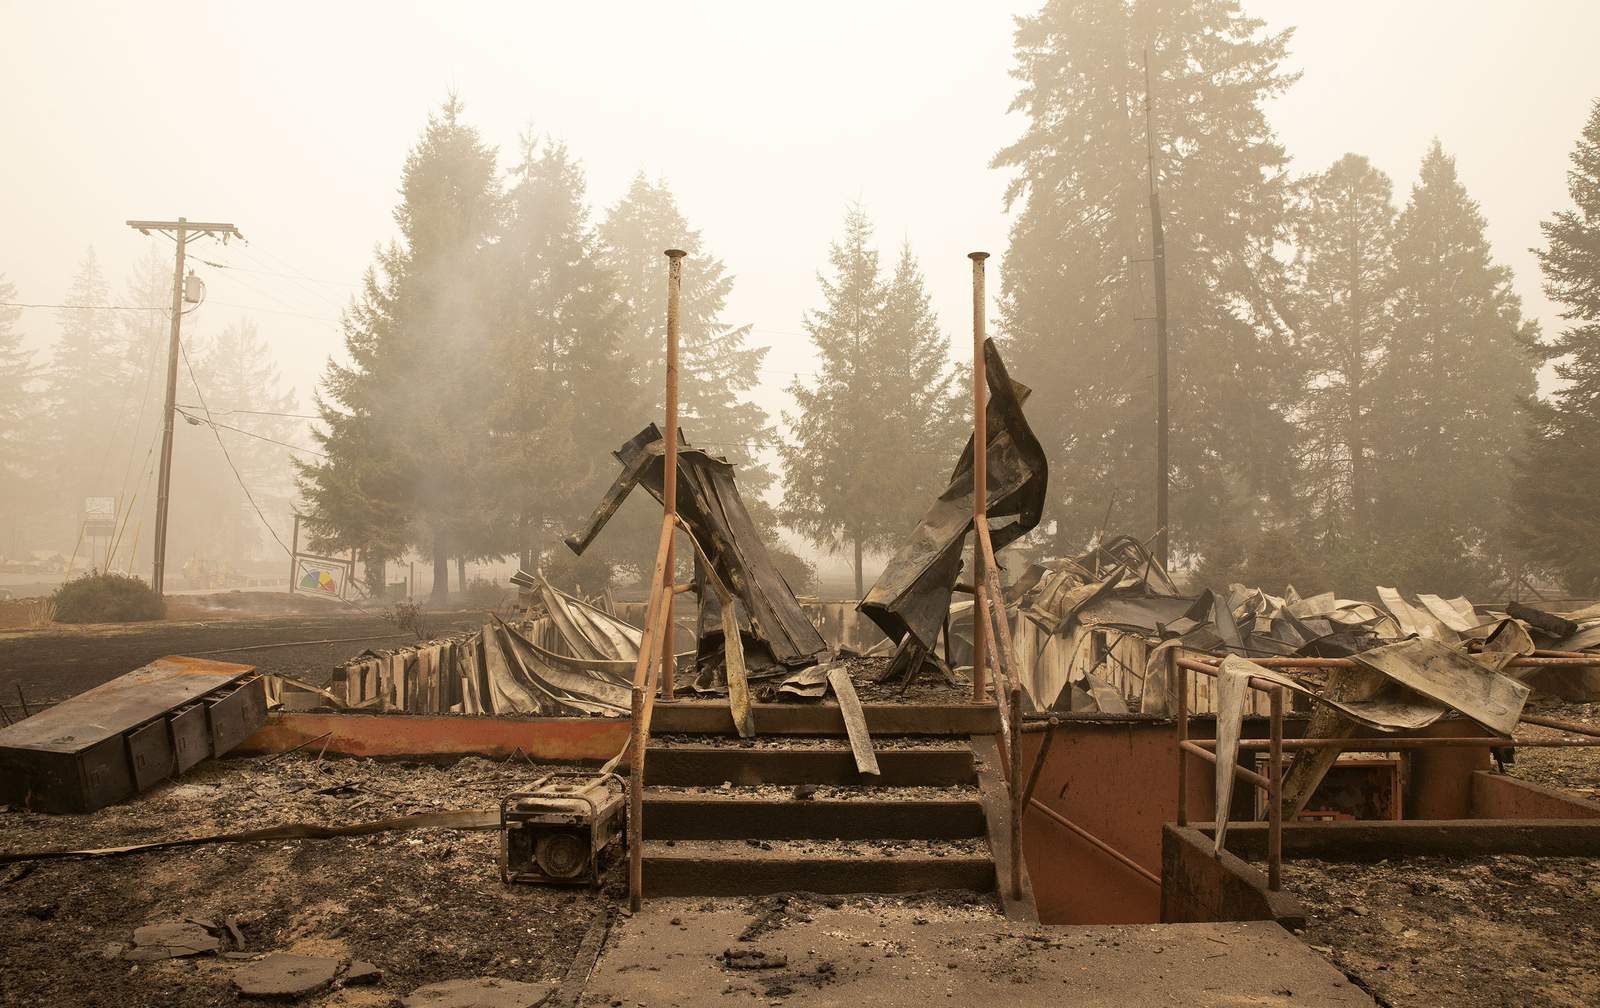 Pacific Power utility sued over devastating Oregon wildfires